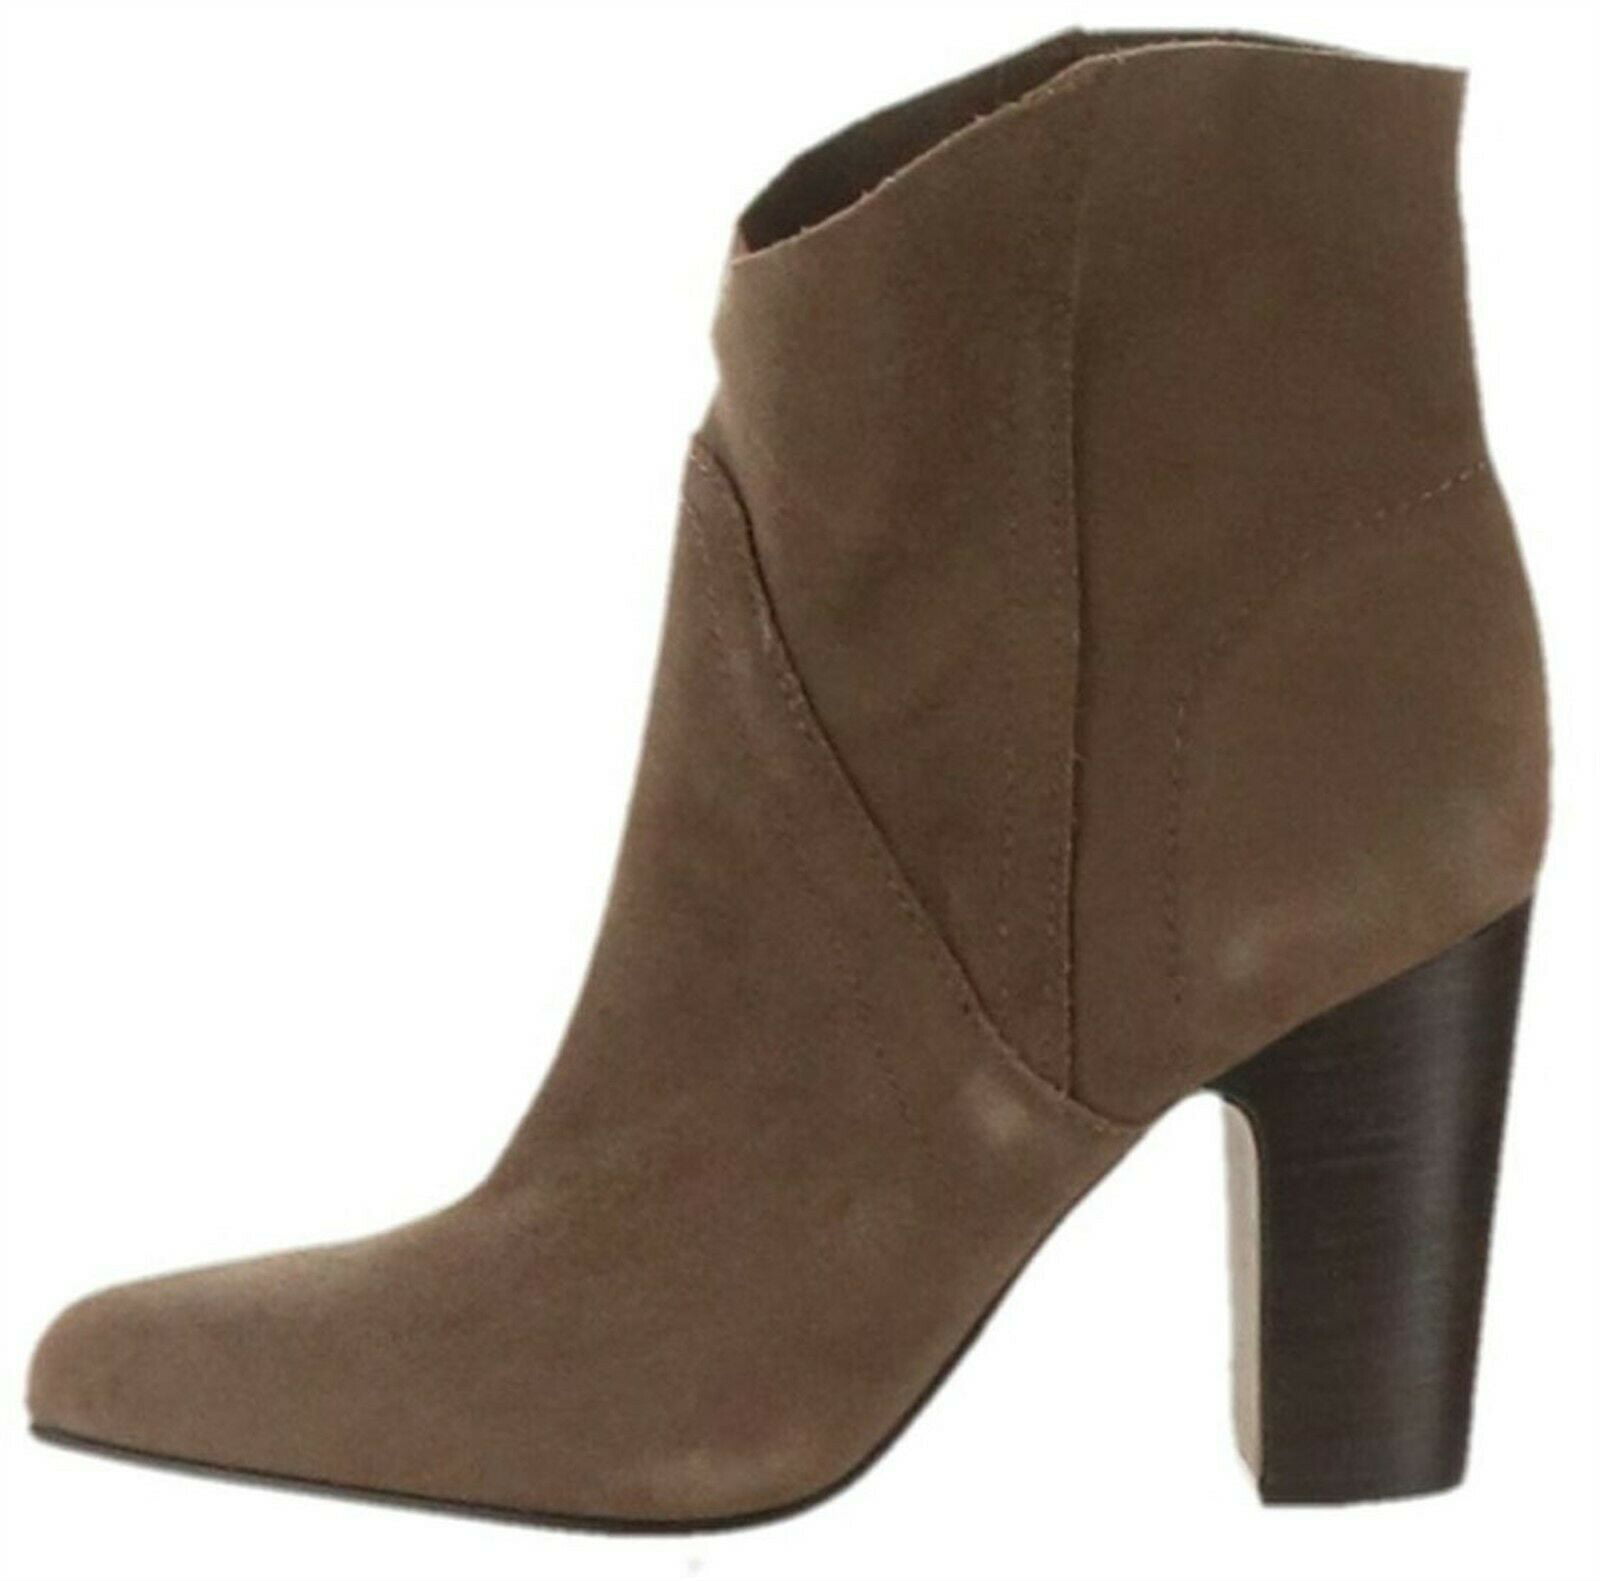 Vince Camuto Suede Ankle Boots Creestal Women's A343491 | Walmart Canada